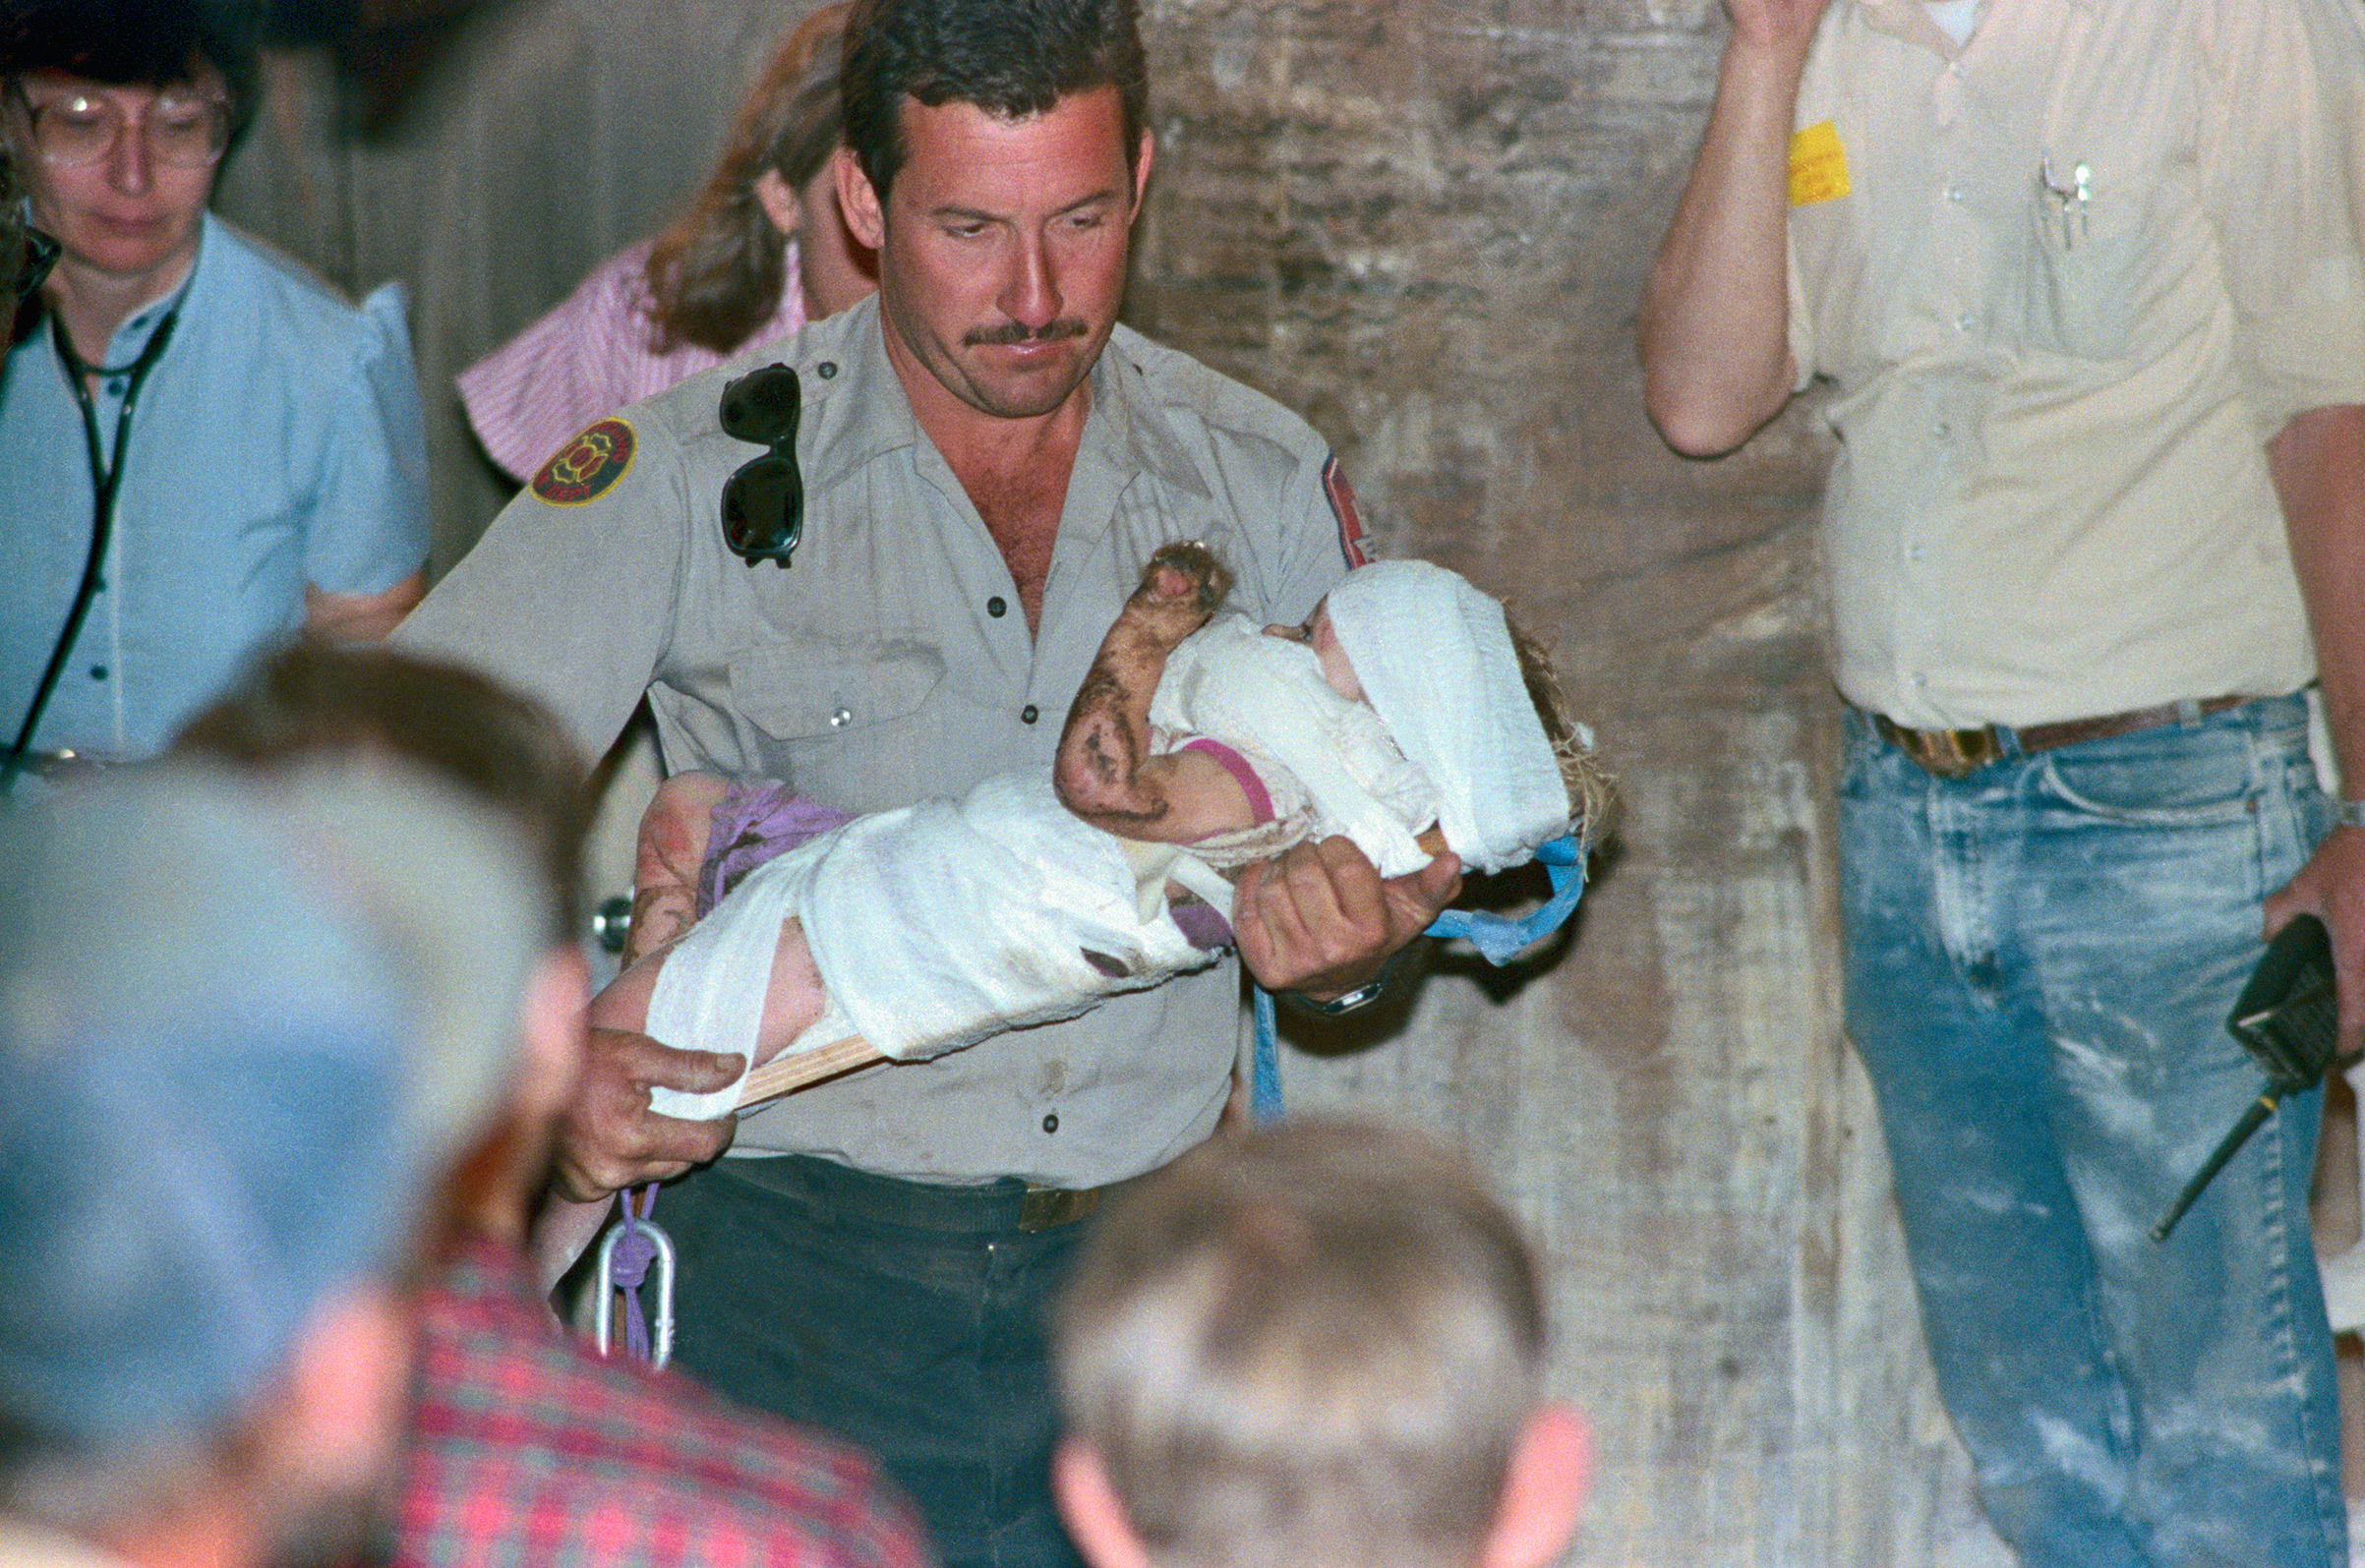 Rescuer rushes baby rescued from fall into a well where lay for three days before she was rescued, Oct. 16, 1987. (Bettmann/Getty Images)